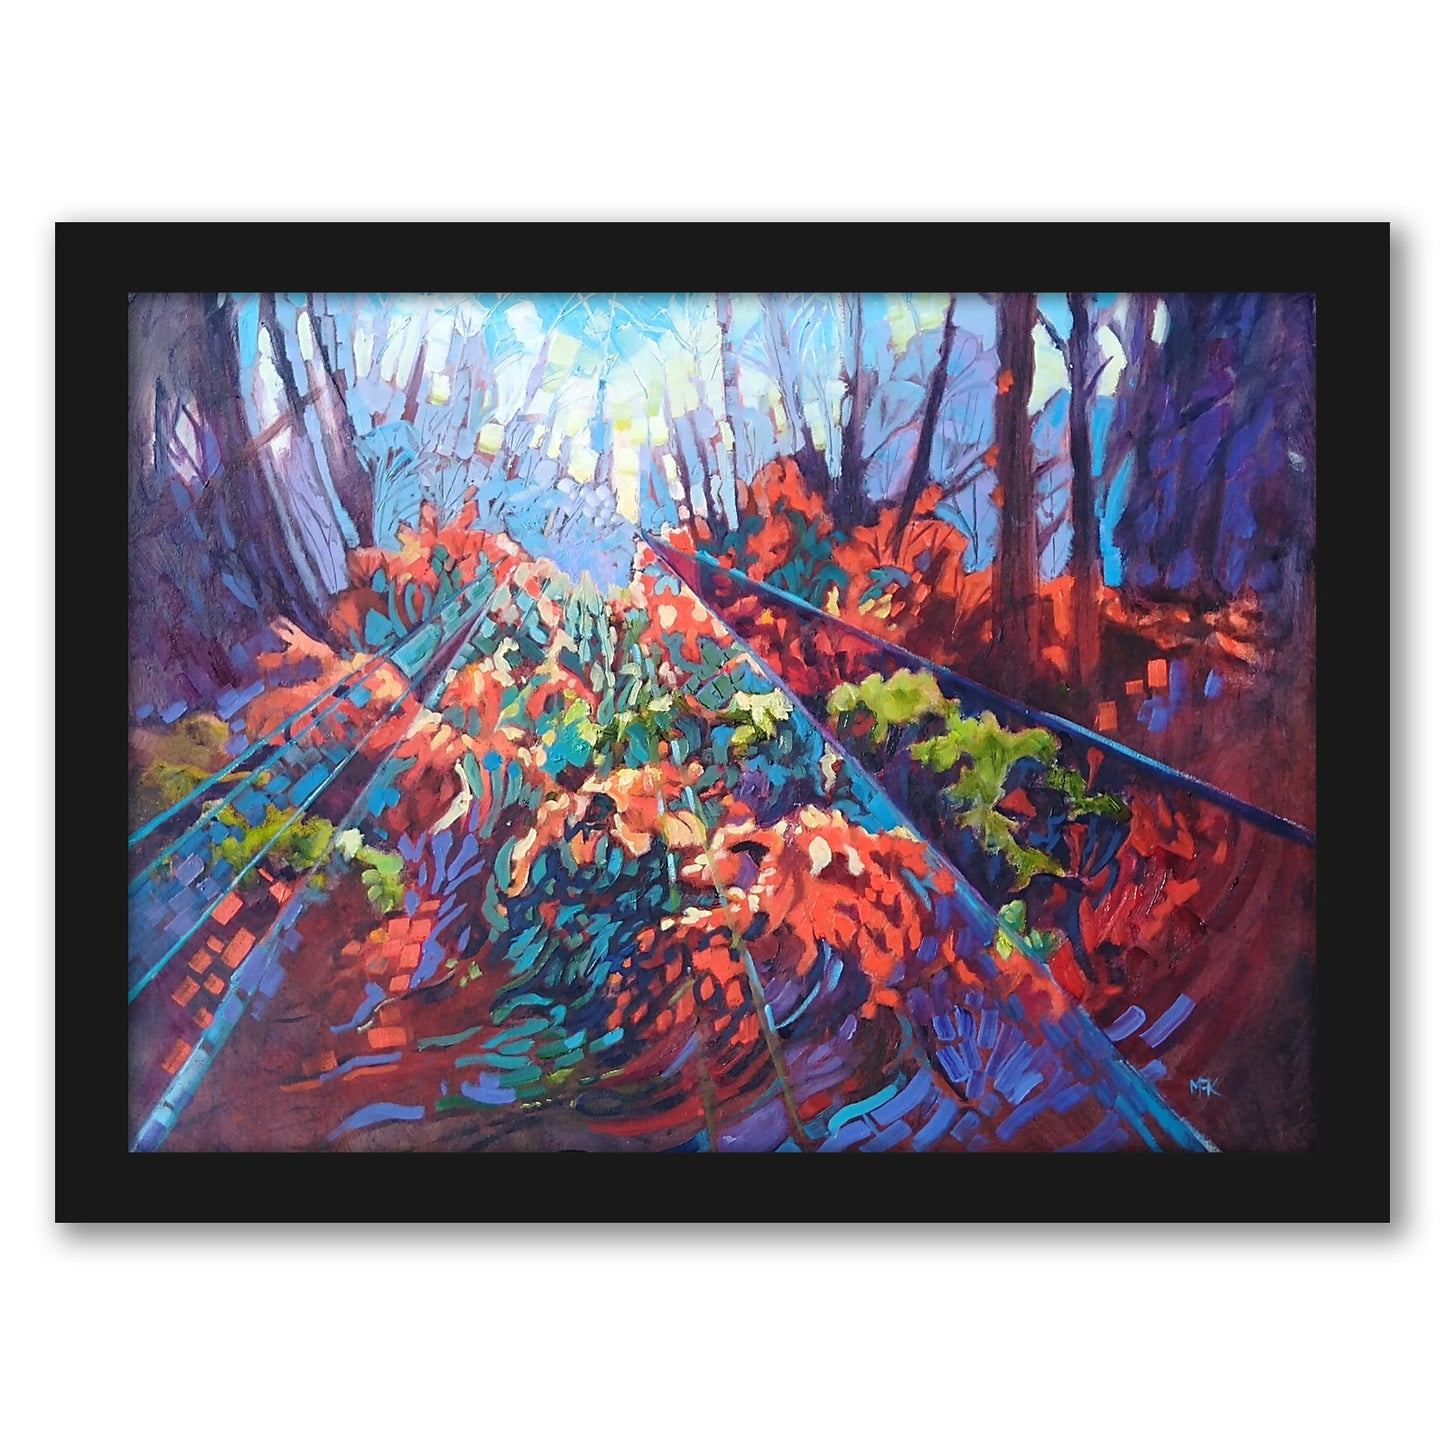 Autumn In The Woods By Mary Kemp - Framed Print